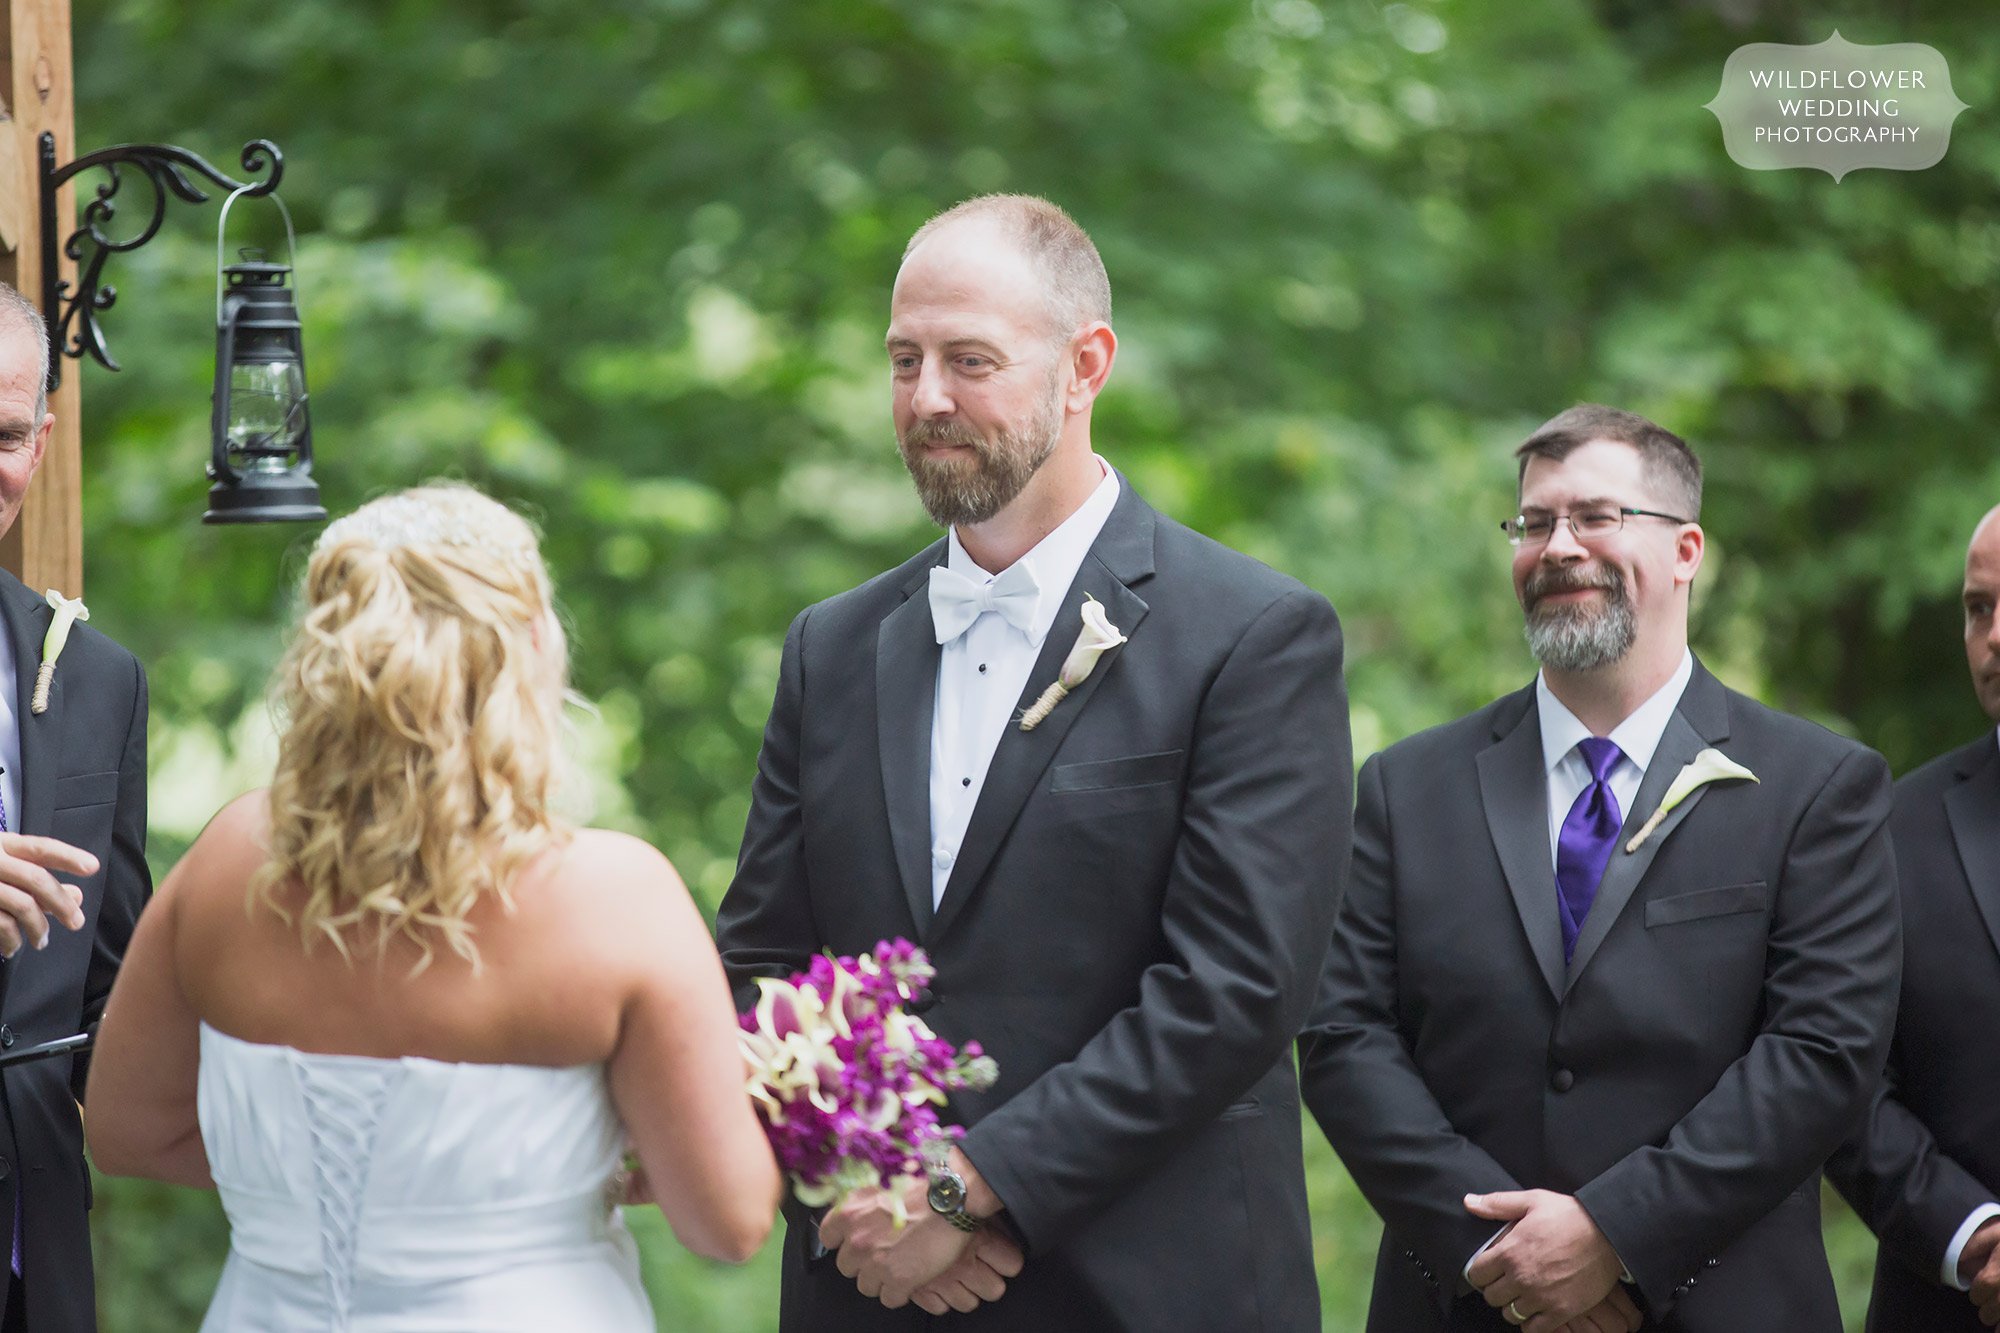 The groom sees the bride at this KS wedding.